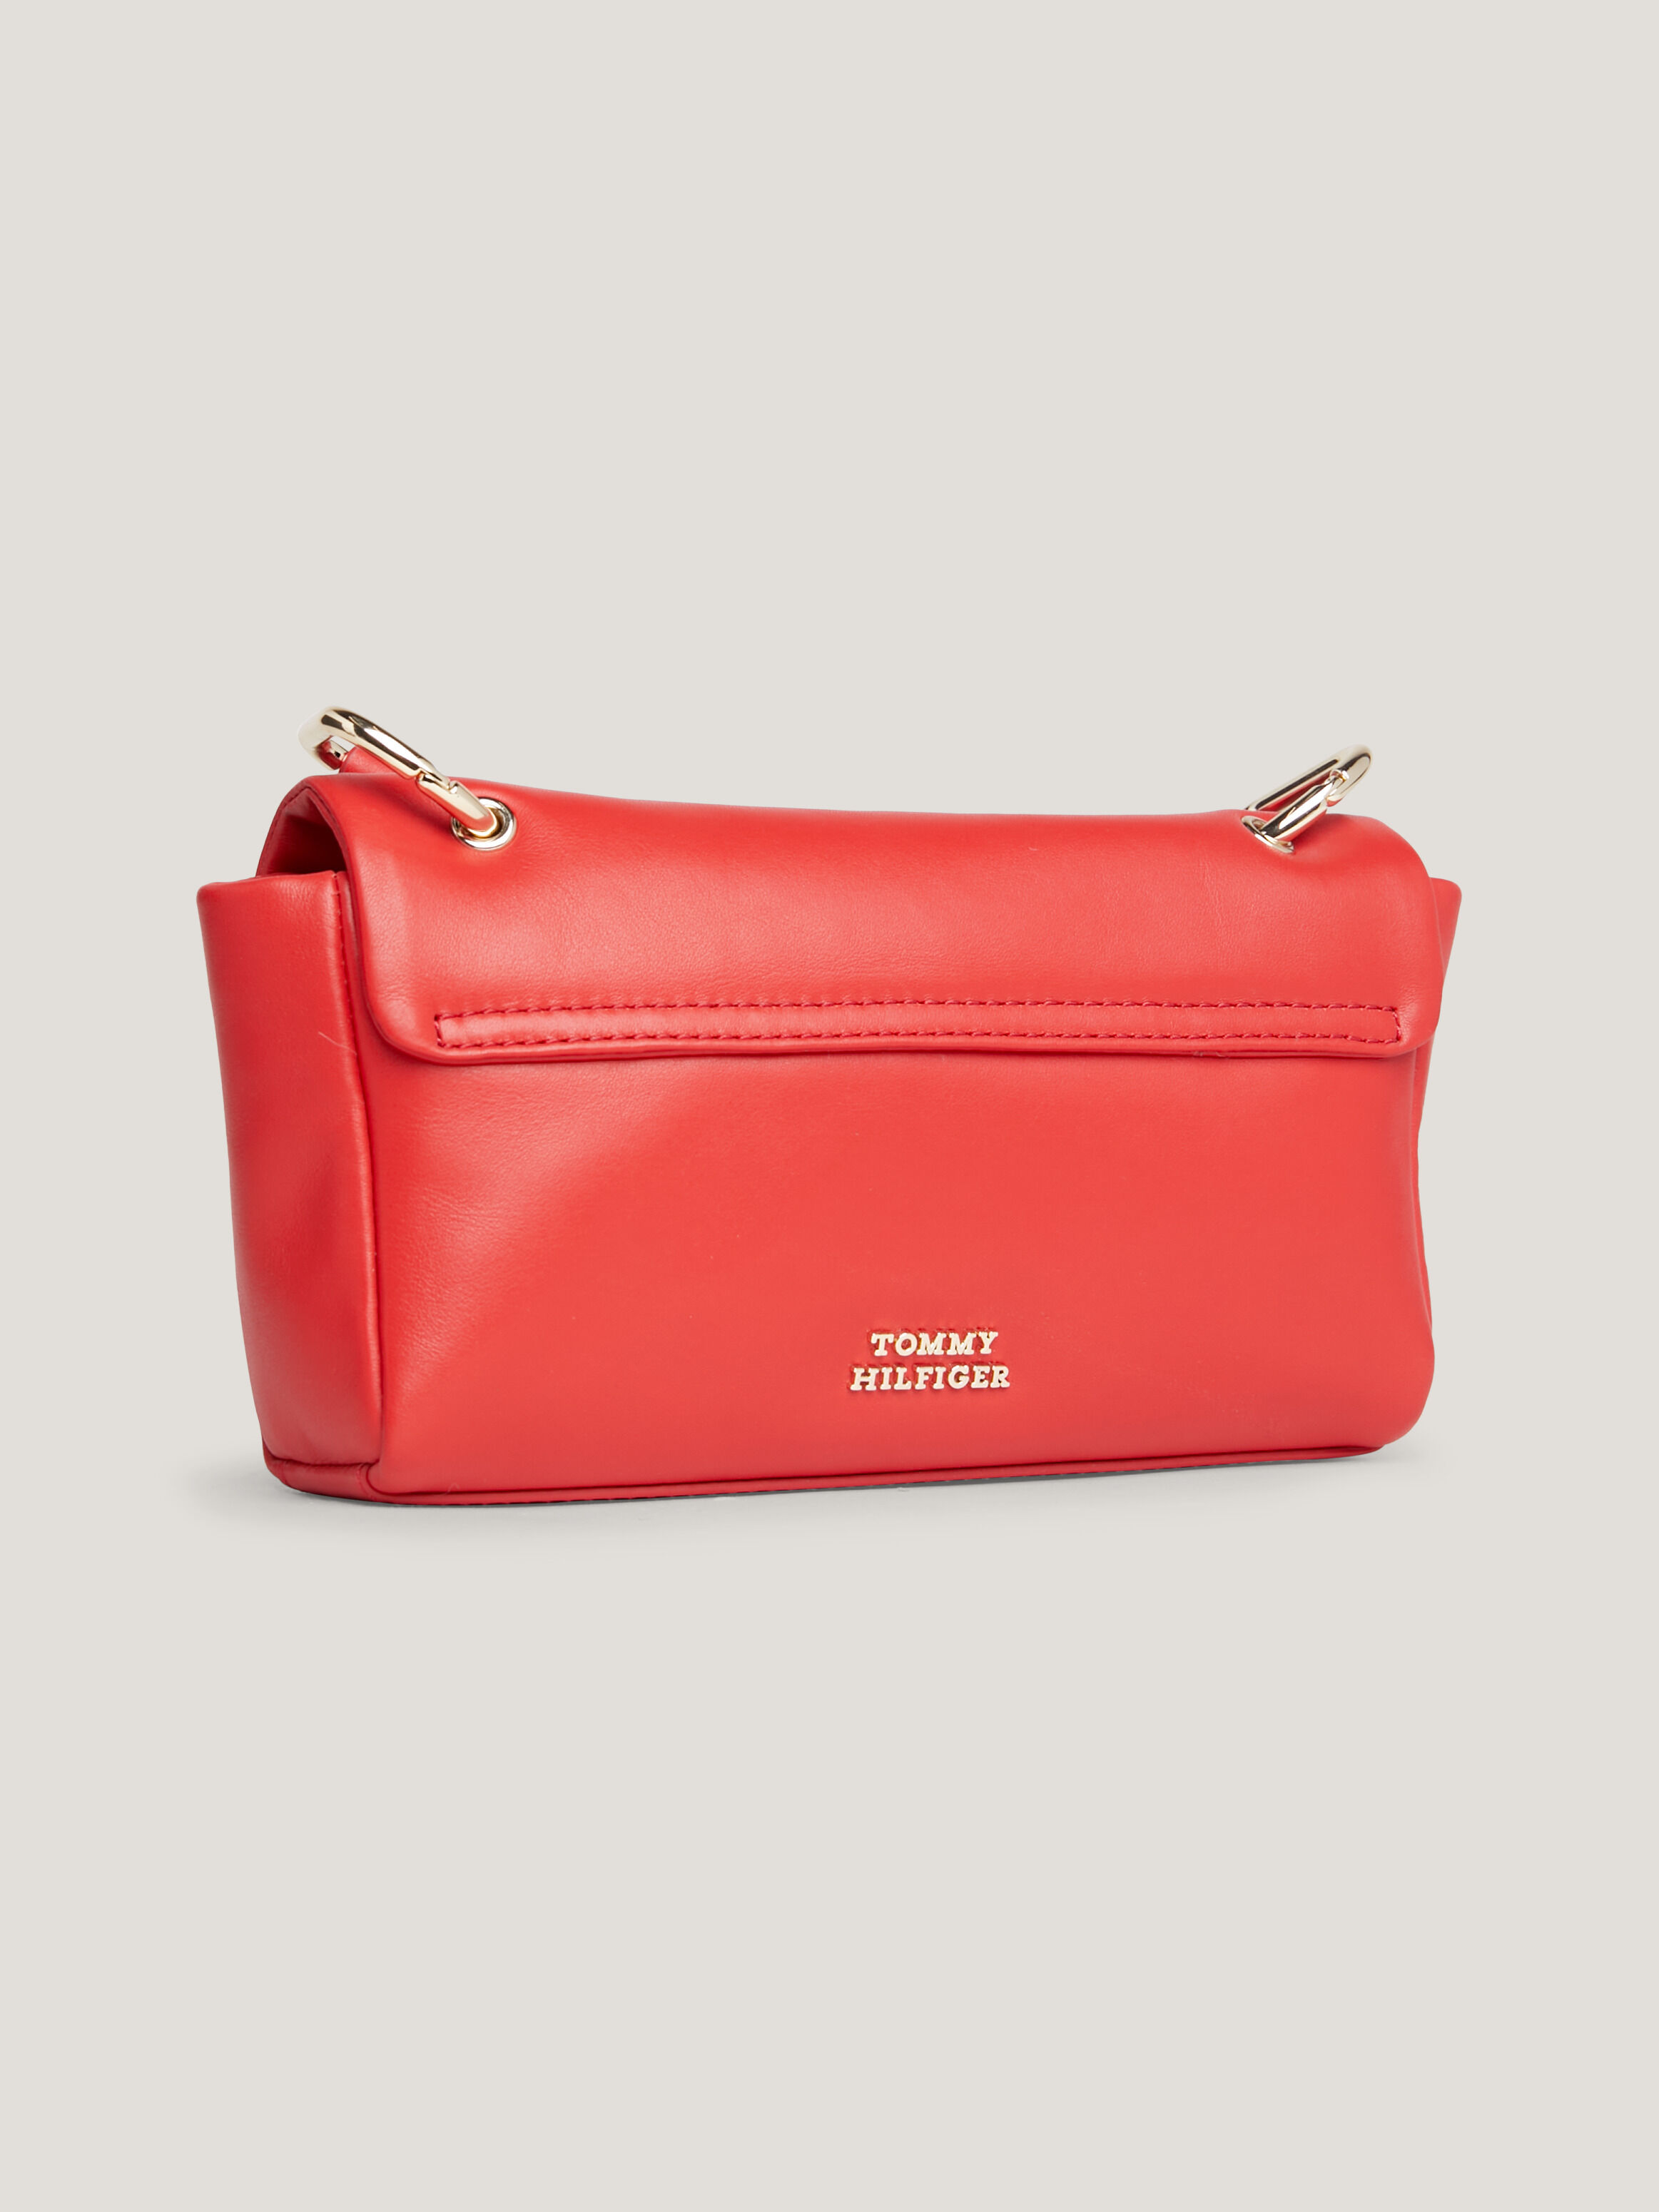 Tommy Hilfiger bags for women in the Sale | Save online with ZALANDO